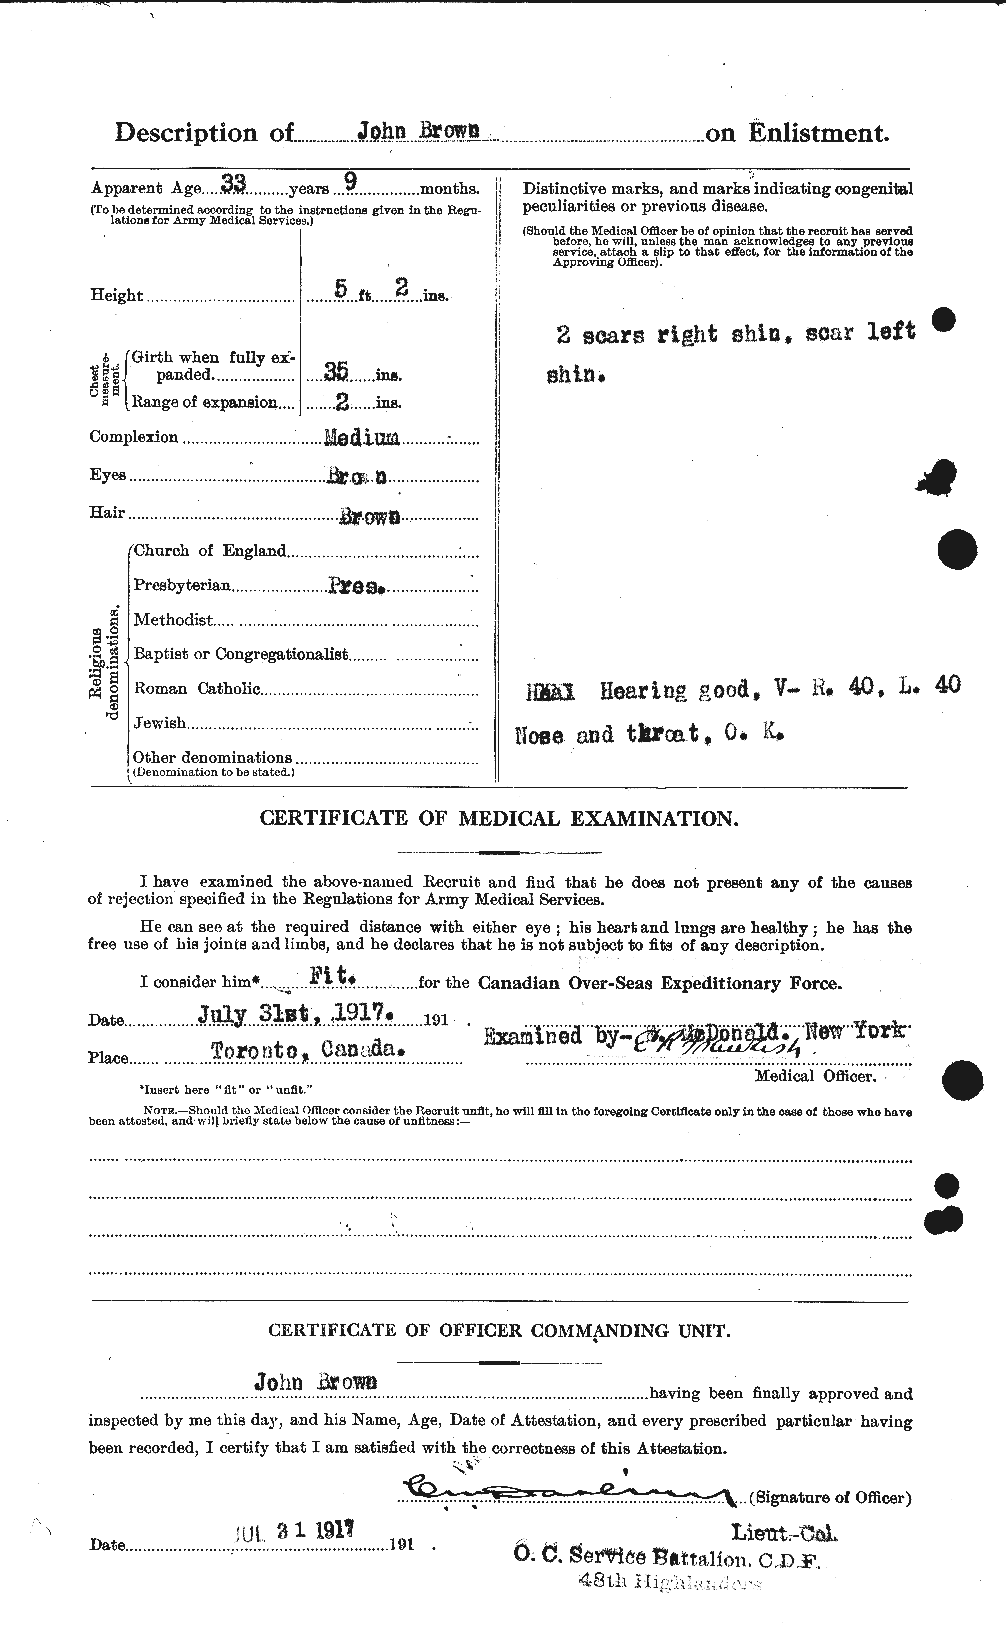 Personnel Records of the First World War - CEF 263891b